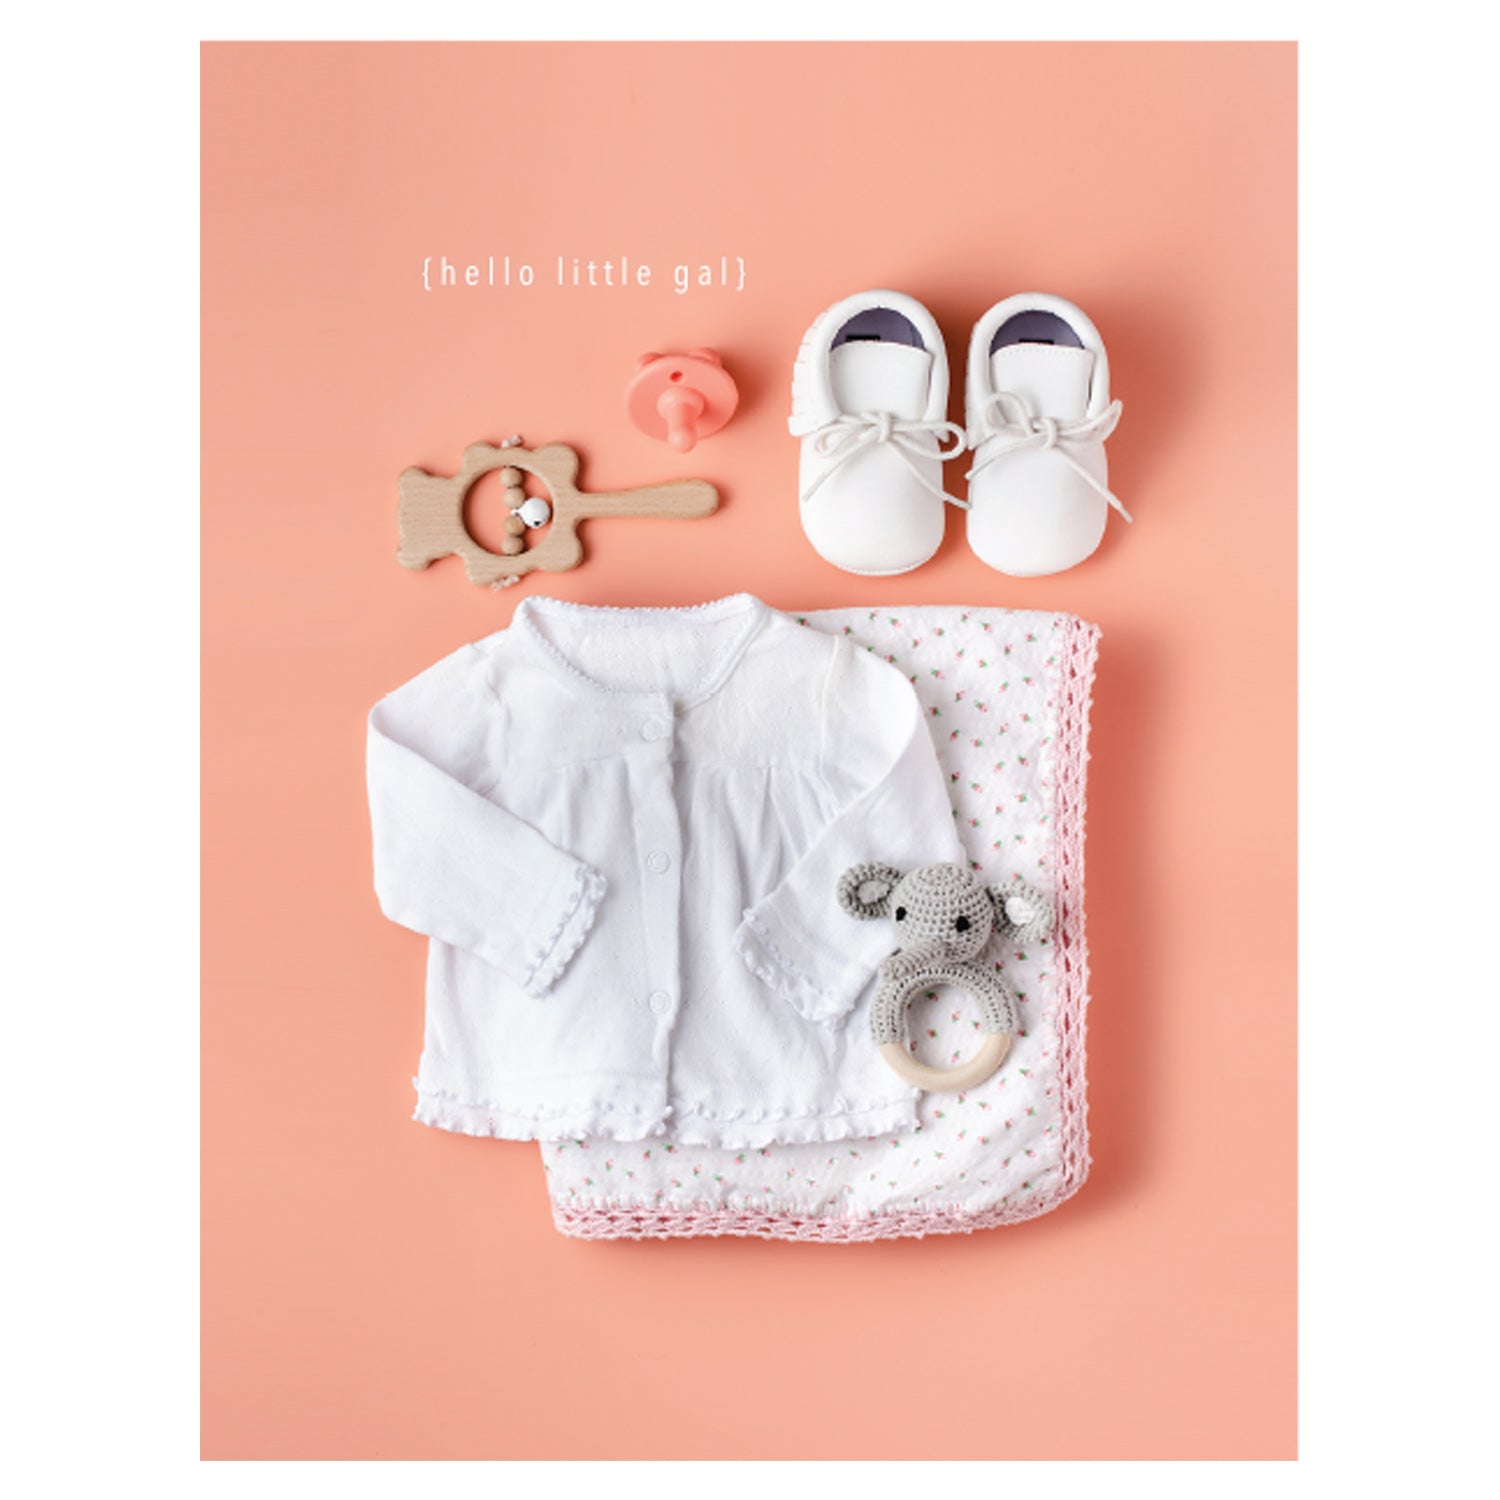 A high-quality Little Gal Card by Hester &amp; Cook, shoes and a teddy bear on a pink background.